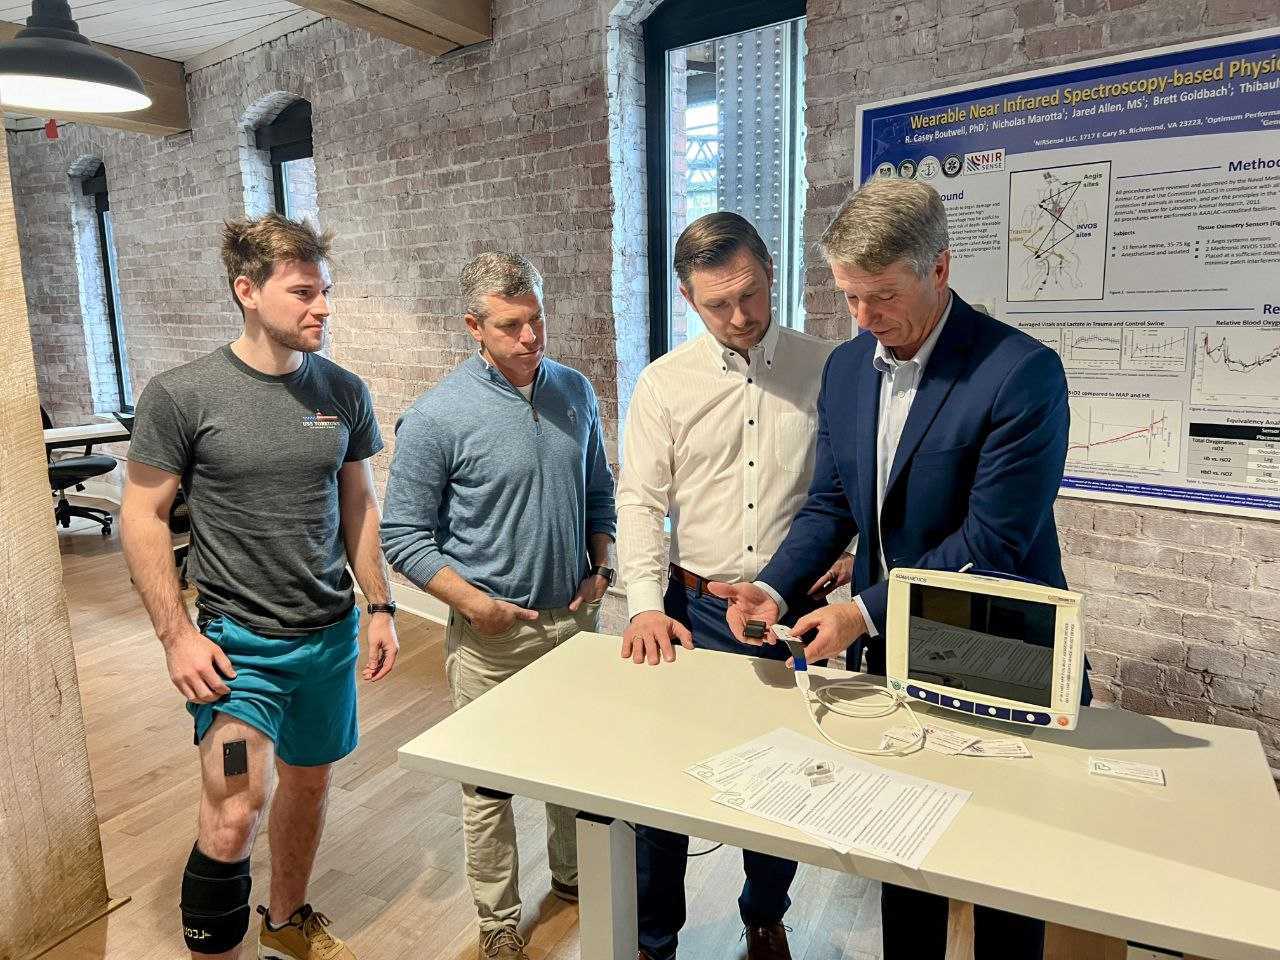 The NIRSense leadership team discussing its proprietary technology with American politician Rob Wittman and showing him how the patient monitors work.